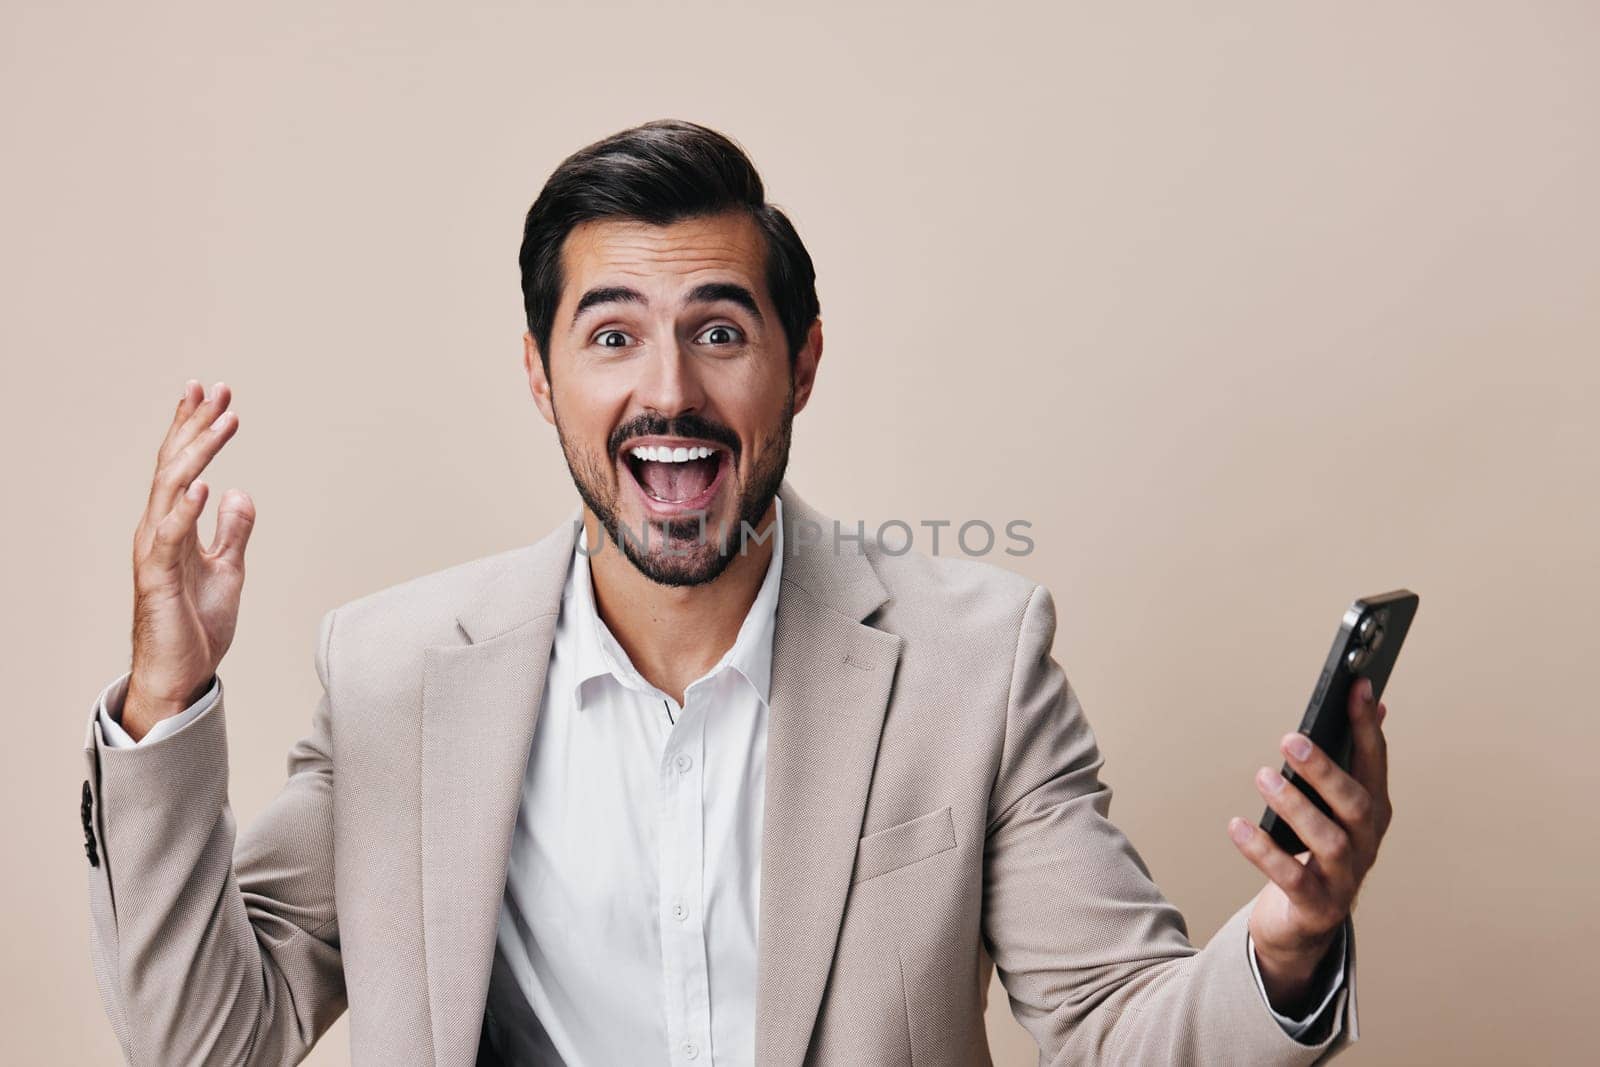 man business lifestyle message hold technology suit trading space guy confident online background happy studio portrait person copy smartphone smile phone call